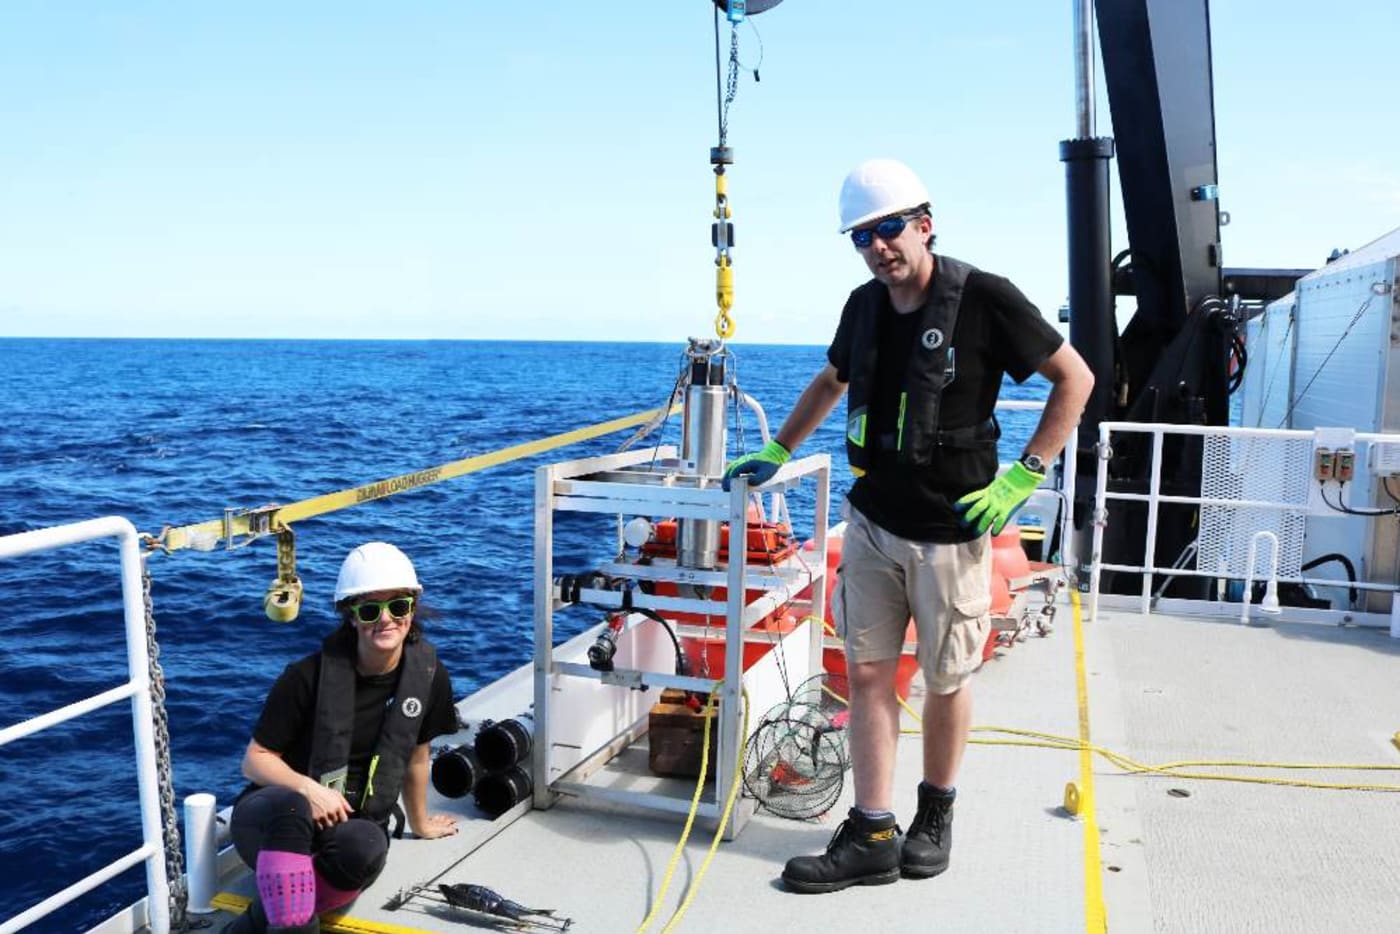 Picture of Johanna Weston and Alan Jamieson on a ship searching for Eurythenes plasticus, a new species of amphipod found living nearly 7 kilometres below sea level that has ingested plastic.